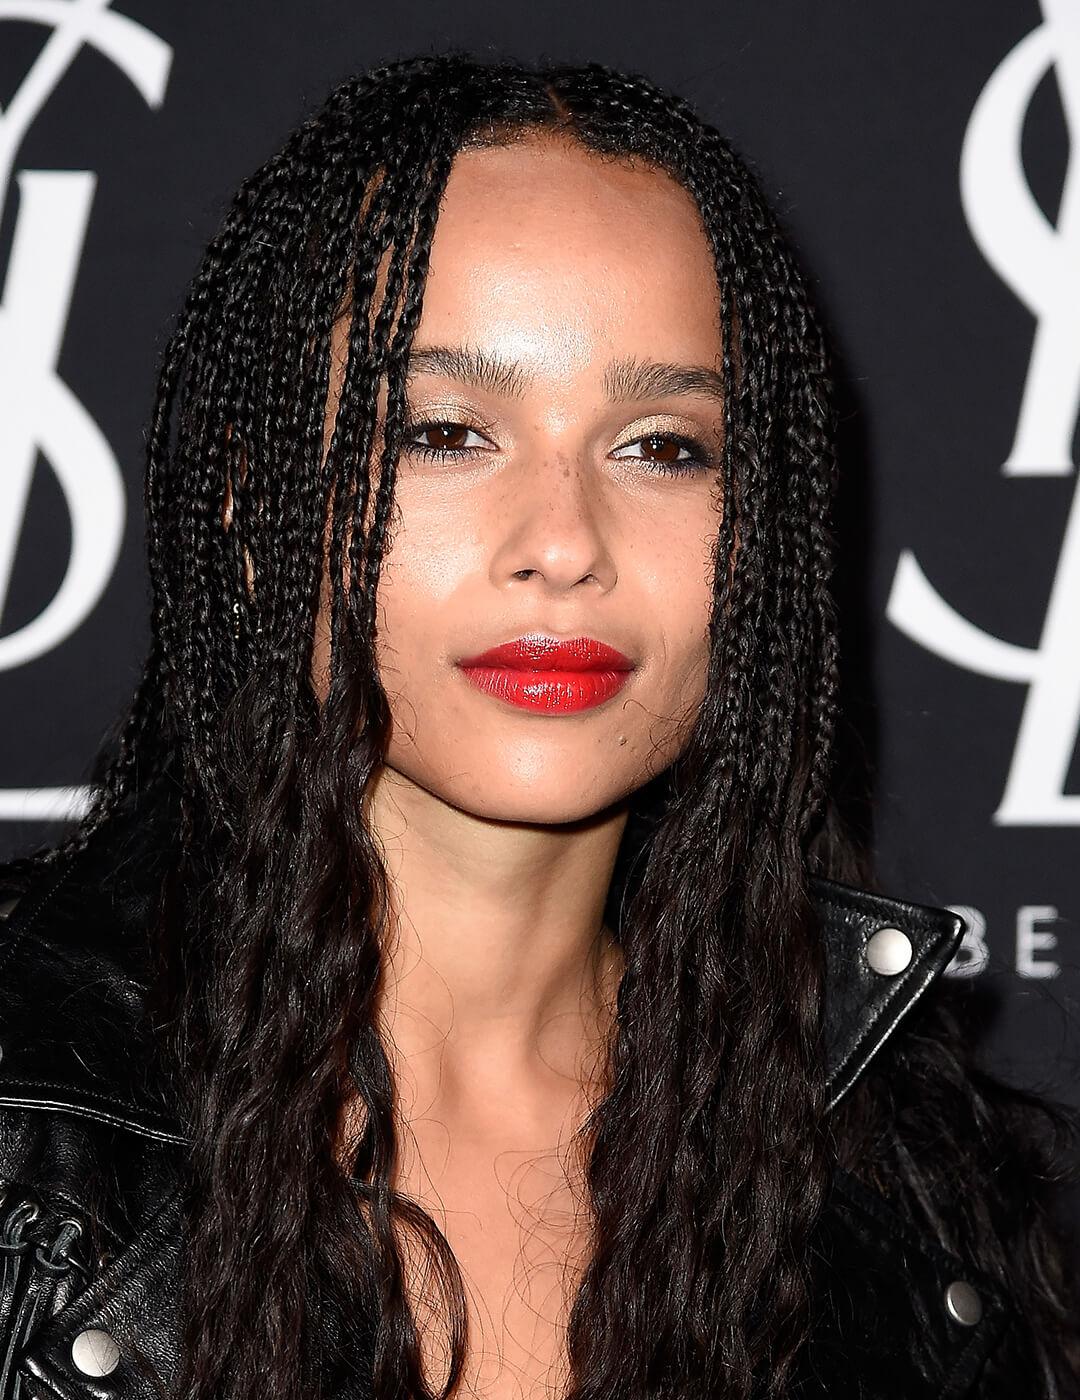 Zoe Kravitz rocking long braided hairstyle and natural makeup look paired with bold red lips